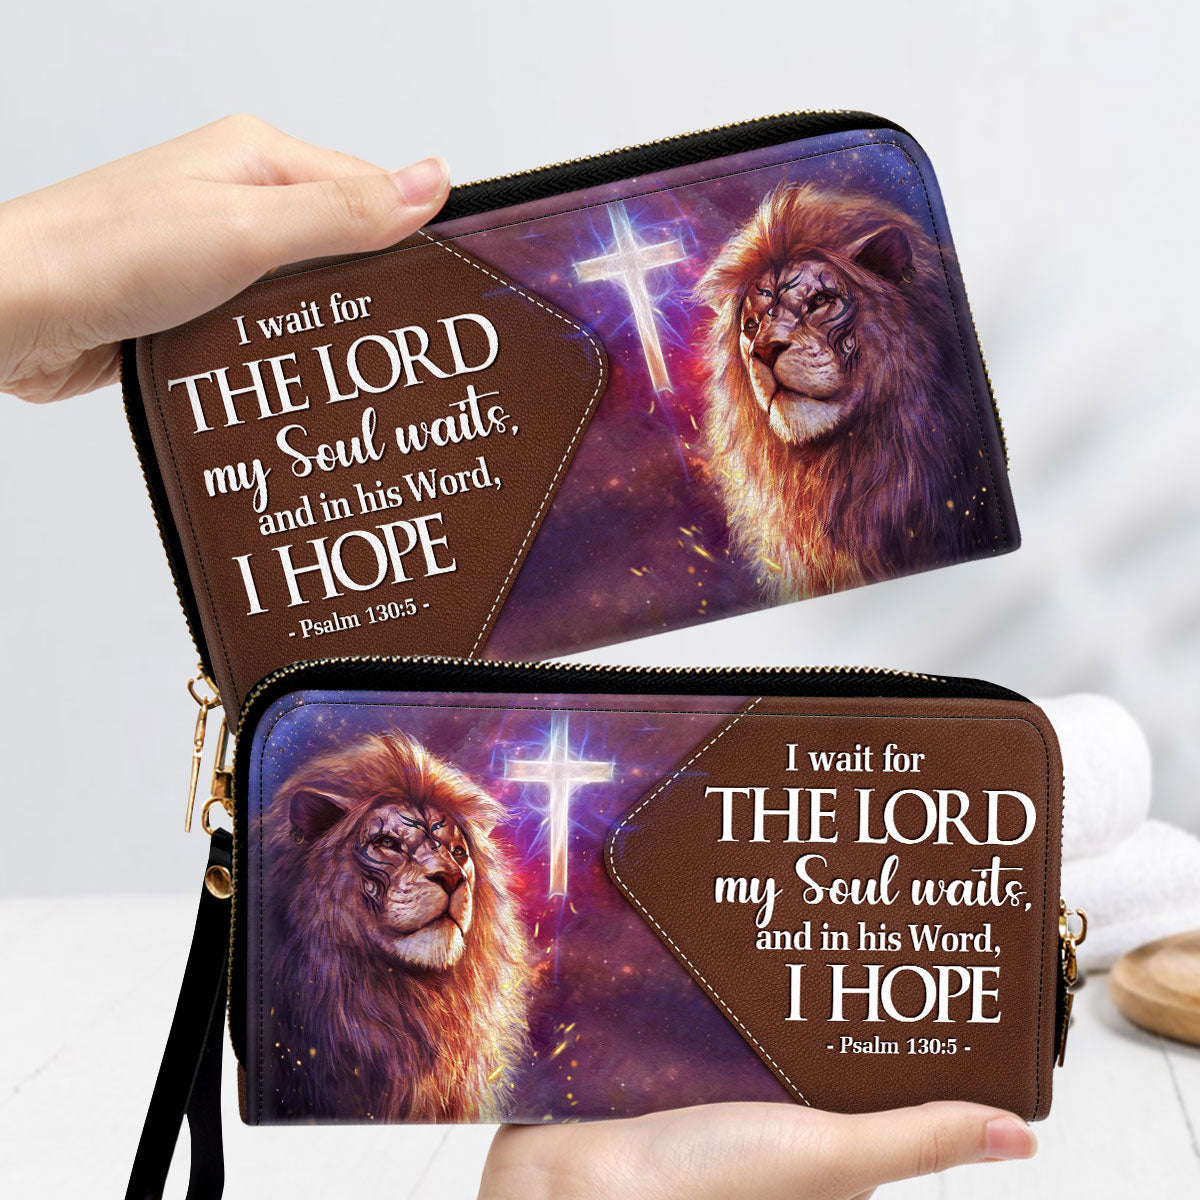 With Wristlet Strap Handle Psalm 1305 Lion And Cross Christ Gift For Religious Woman Clutch Purse For Women - Personalized Name